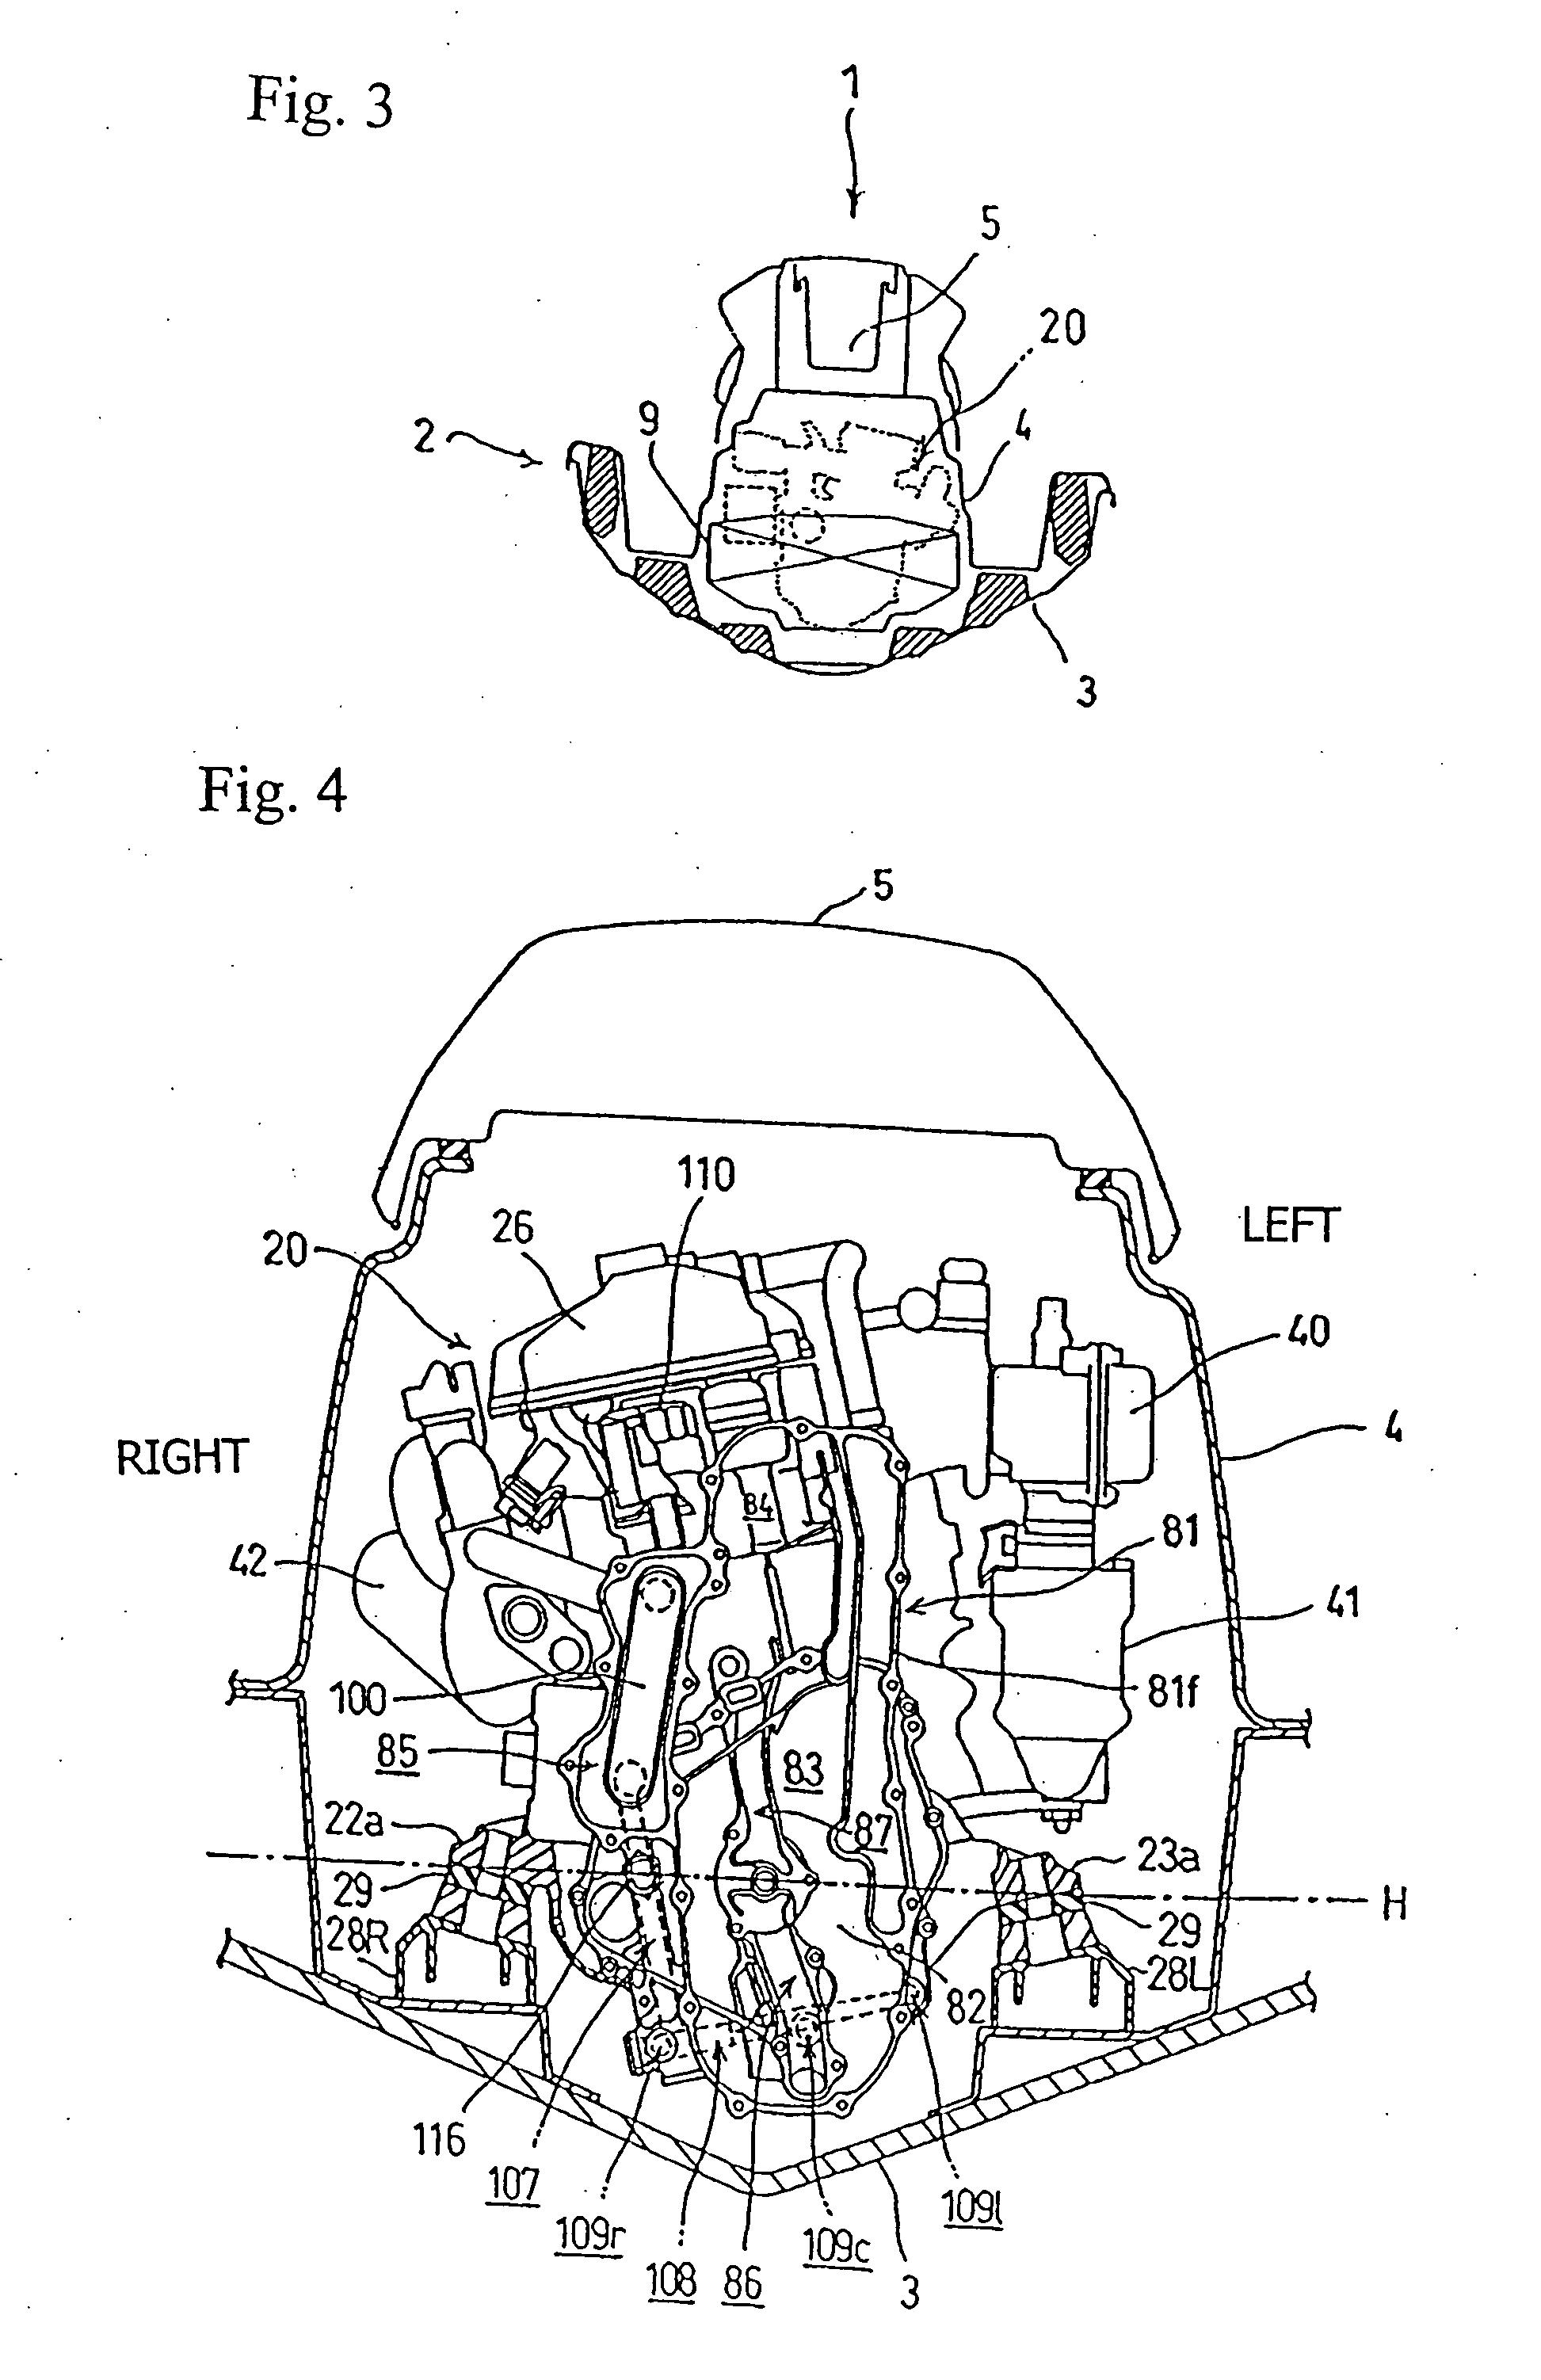 Internal combustion engine having an improved oil cooling structure, and personal watercraft incorporating same